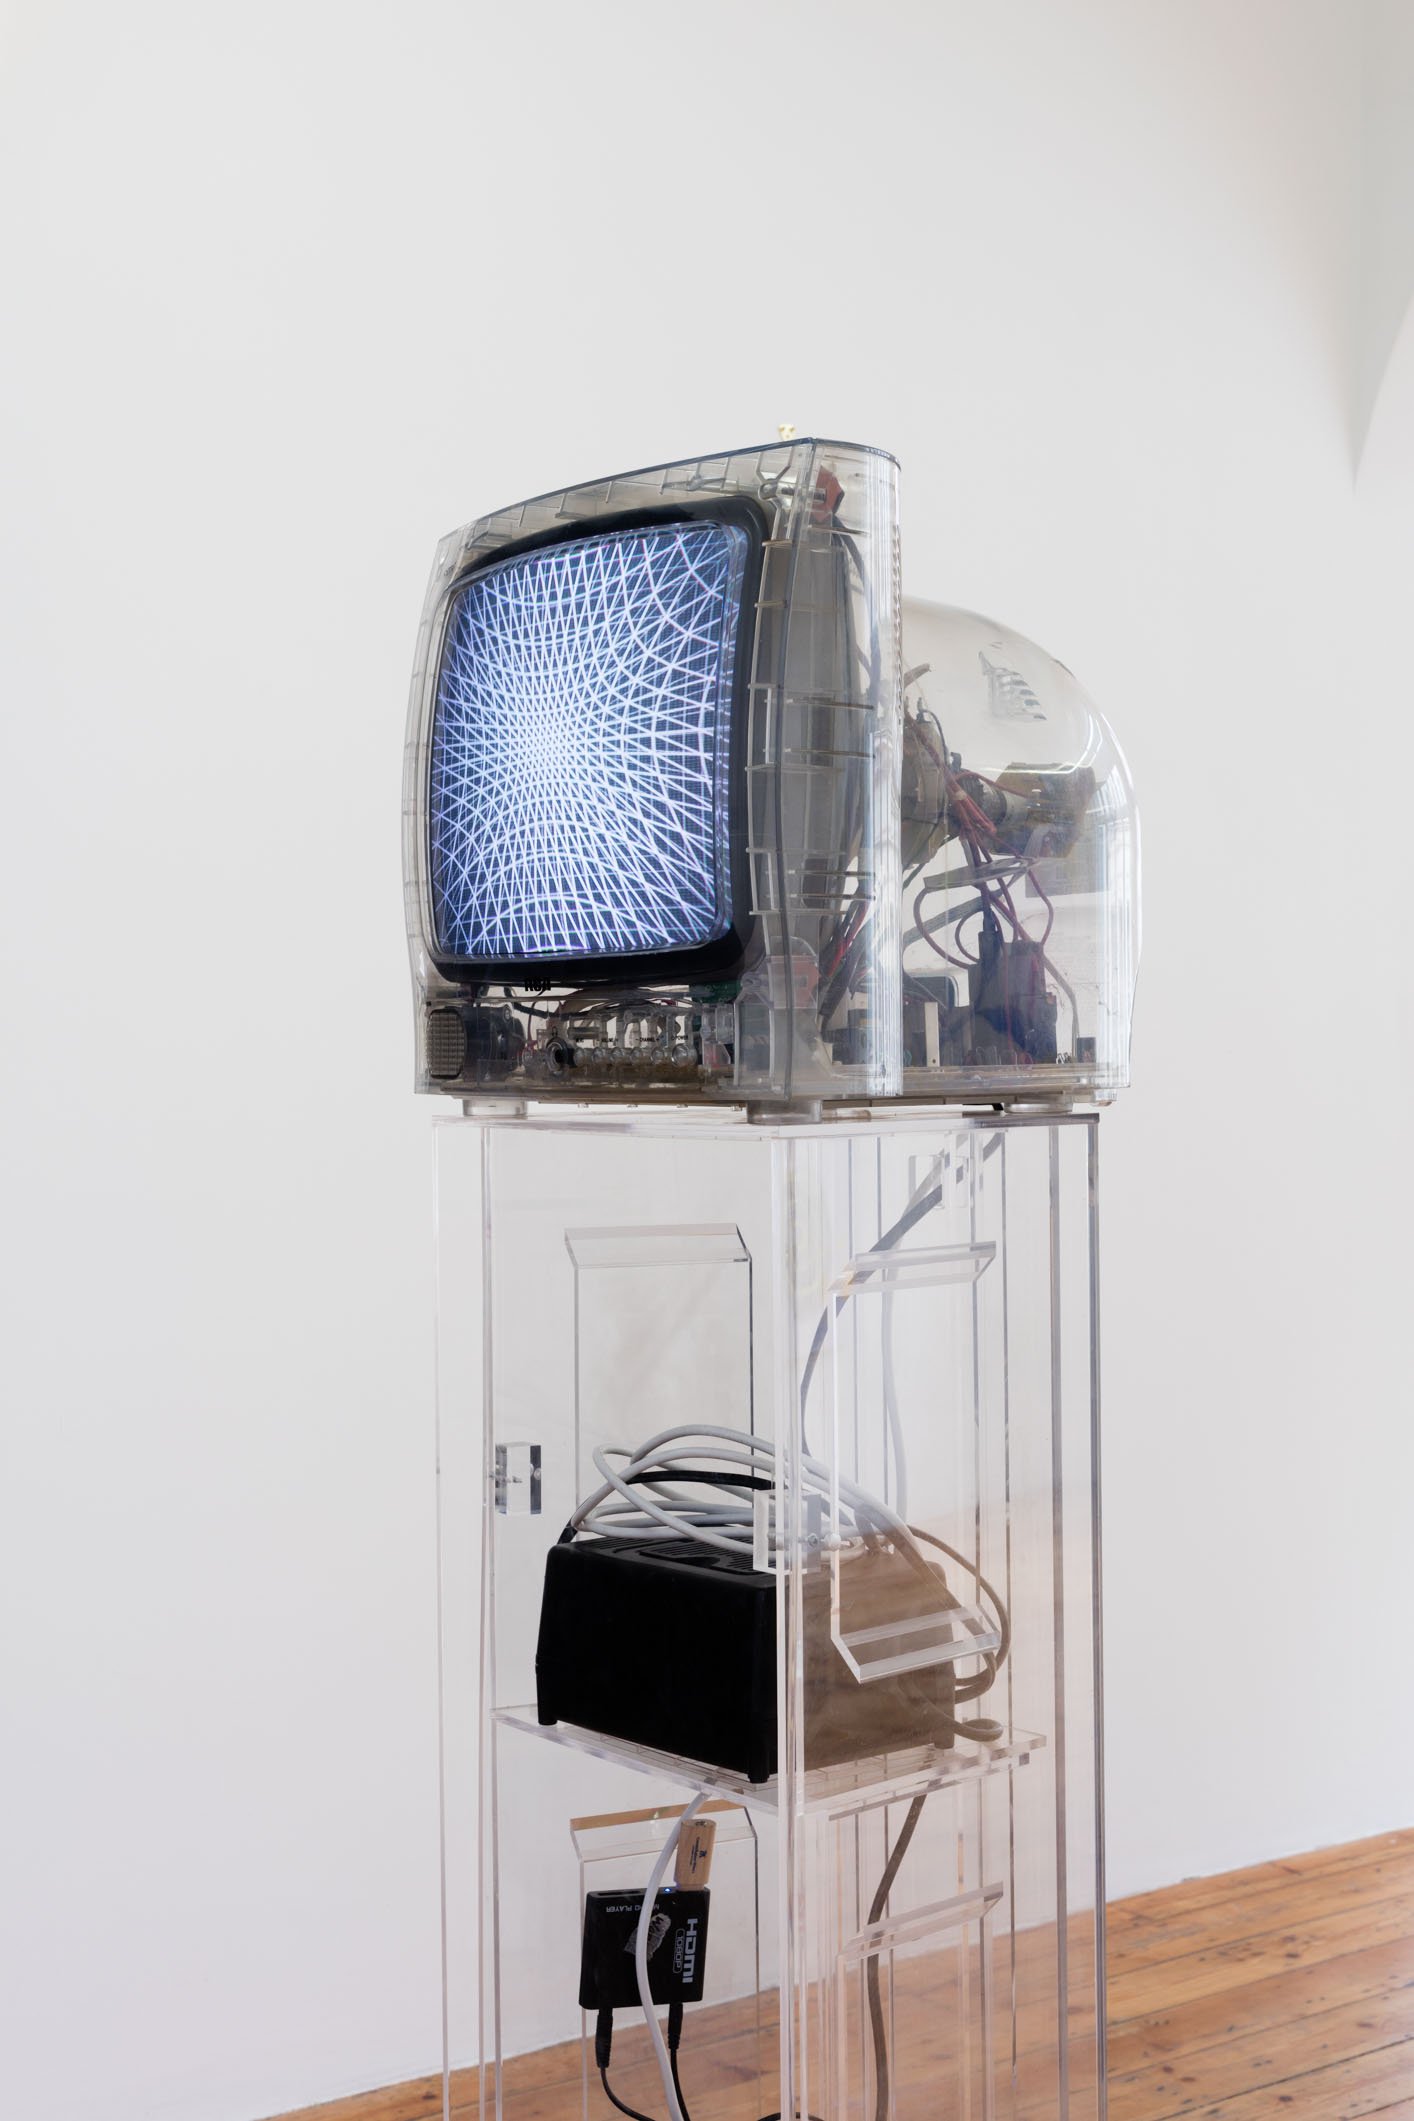 Eloise Hawser, Untitled, detail, Cathode Ray Wyoming Prison TV’s 1996, animation, custom-built perspex electrical cabinets, transformer, modulator, media player, 2013